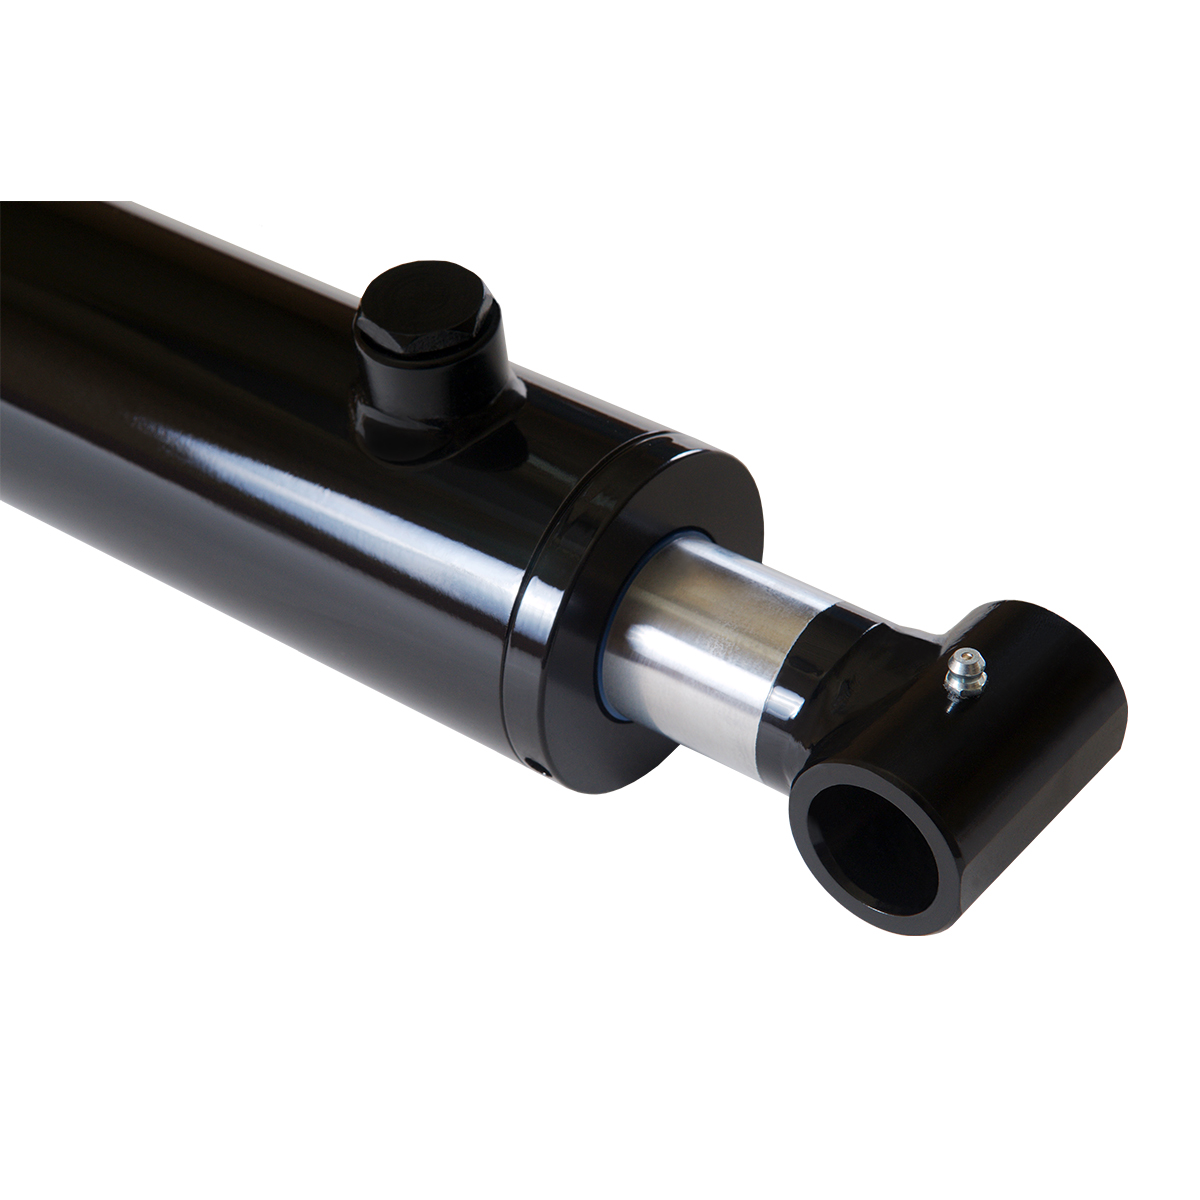 2.5 bore x 36 stroke hydraulic cylinder, welded cross tube double acting cylinder | Magister Hydraulics